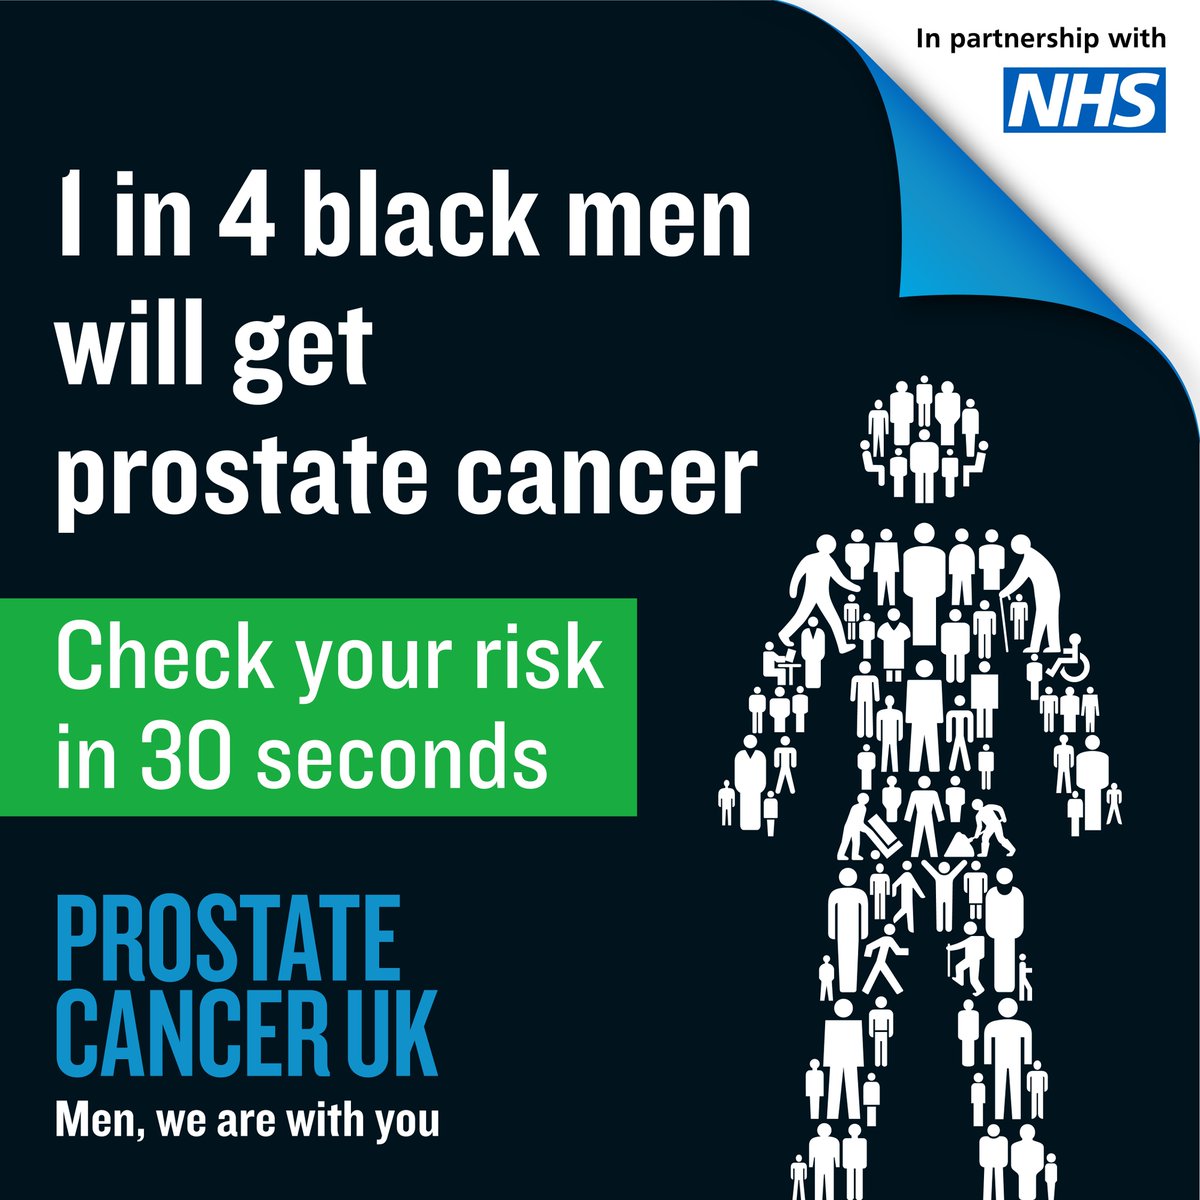 1 in 4 black men will get prostate cancer in their lifetime. Check your risk: prostatecanceruk.org/risk-checker #menwearewithyou #prostatecancer #menshealth 
#nhs #chesterpcn #pcn #chester #cheshire #healthy #gpsurgery